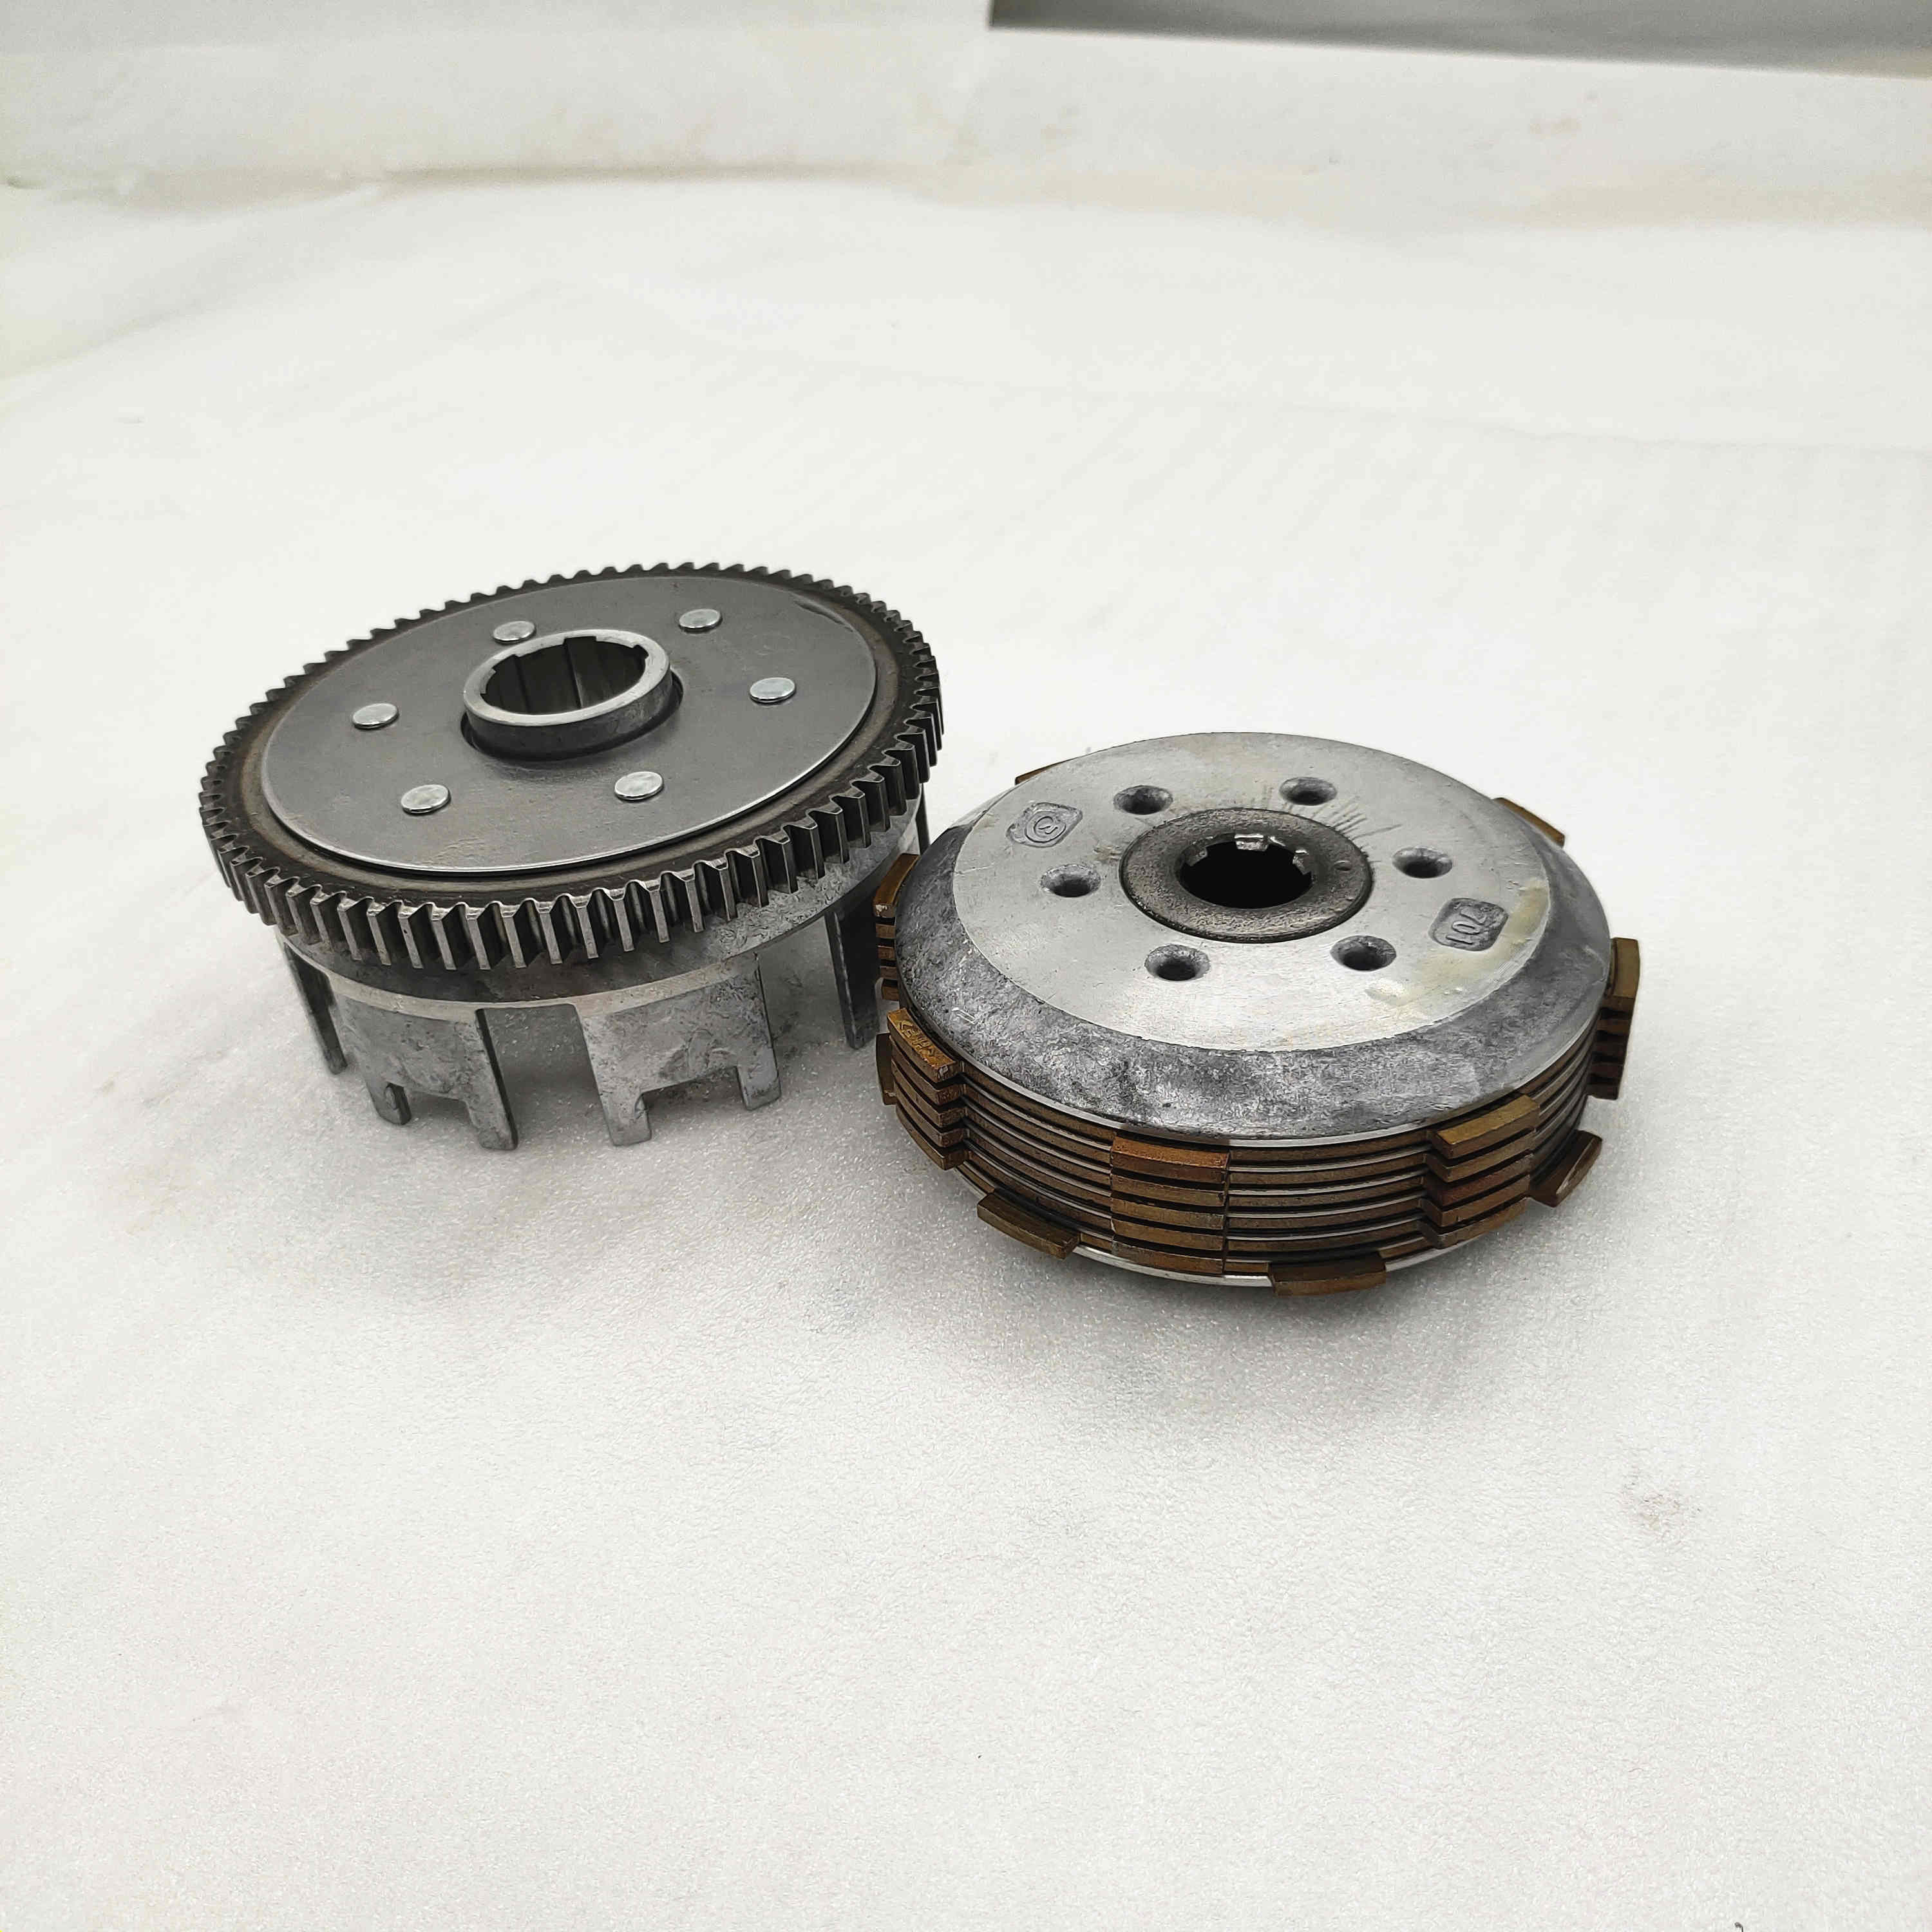 2021 Hot sale 150cc AIr-cooled engine assembly clutch for selling Clutch plate disc clutch assembly Auto parts truck parts